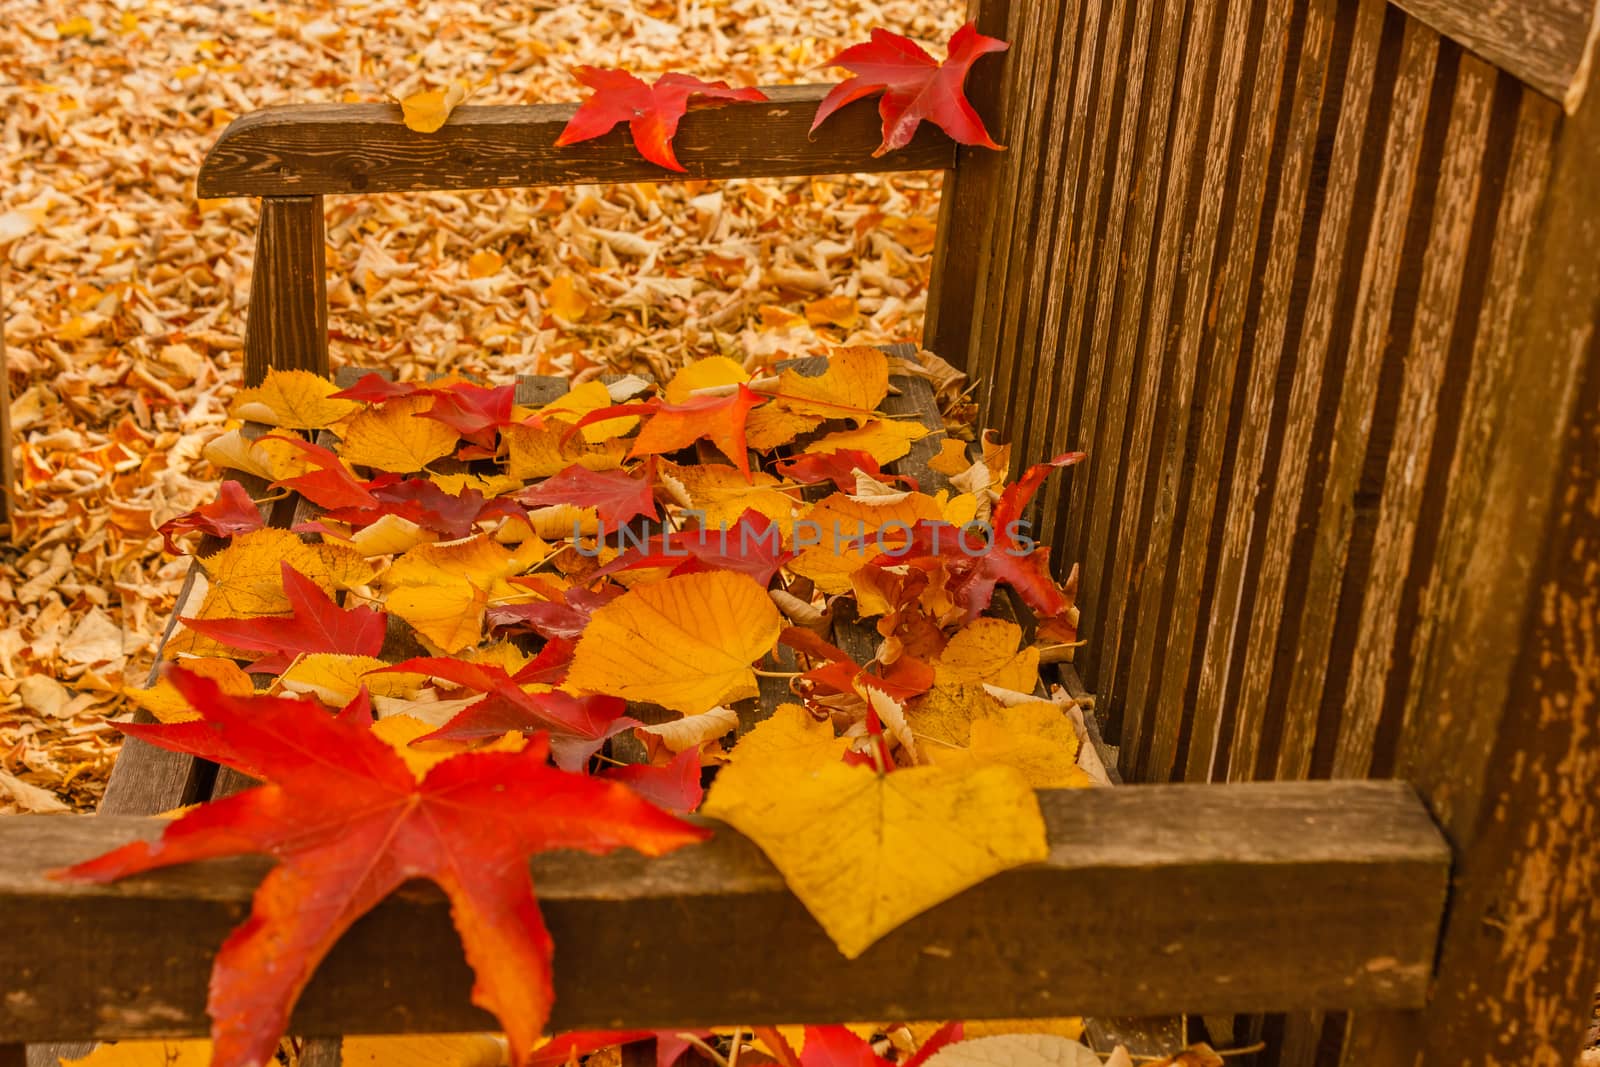 the seat of a bench covered with colored leaves fallen from the trees